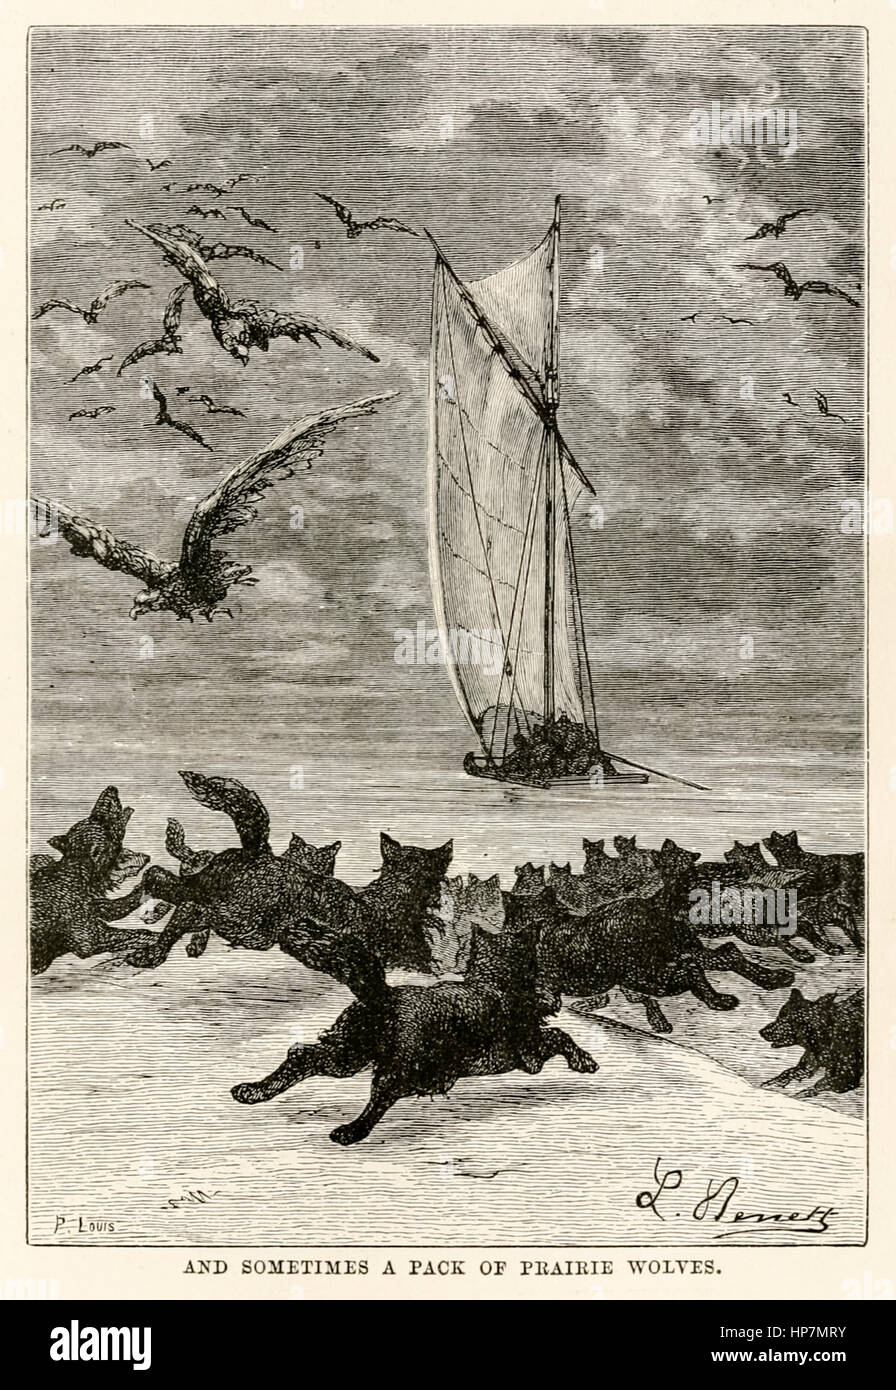 “And sometimes a pack of prairie wolves” from ‘Around the World in Eighty Days’ by Jules Verne (1828-1905) published in 1873 illustration by Léon Benett (1839-1917) and engraving by Louis. Stock Photo